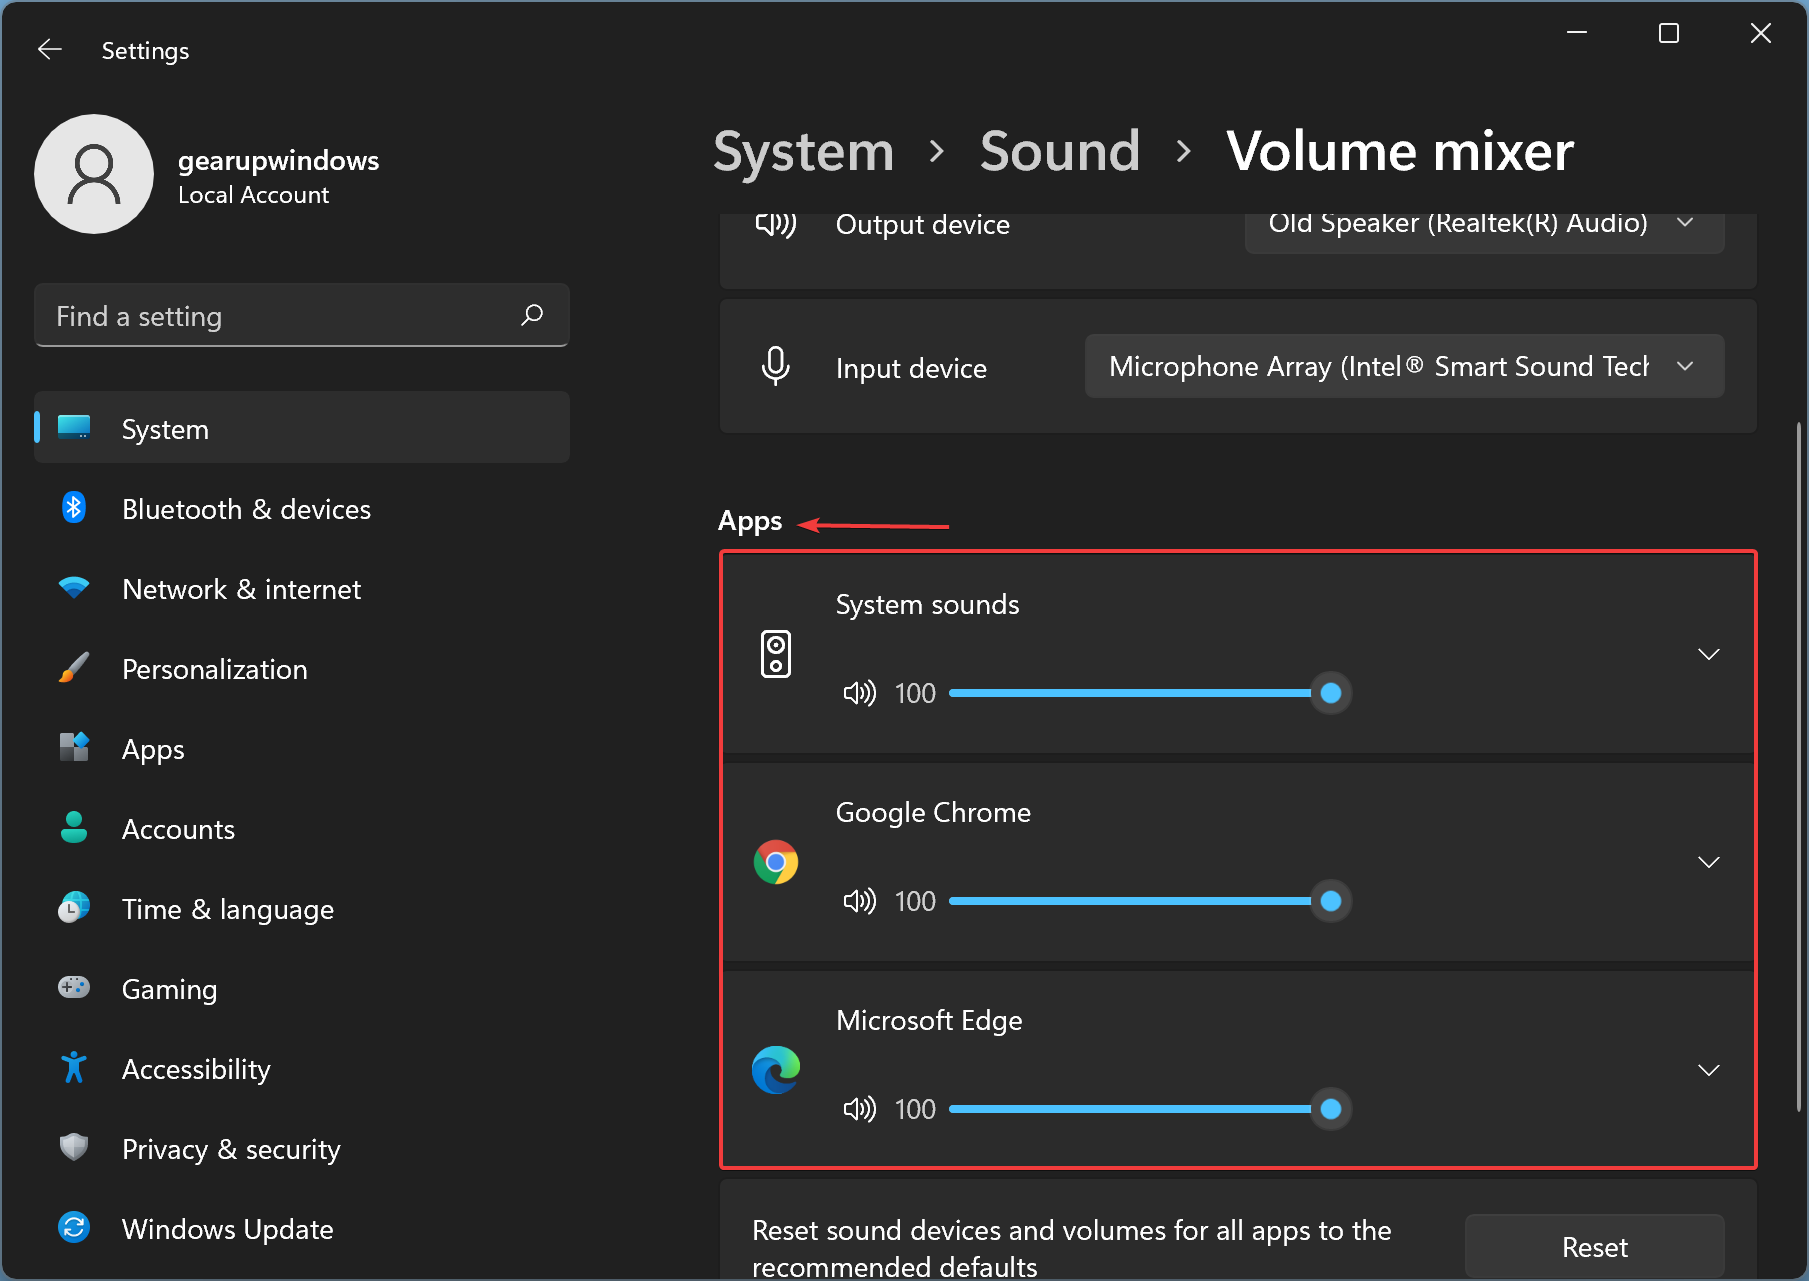 Sound preferences and volume settings